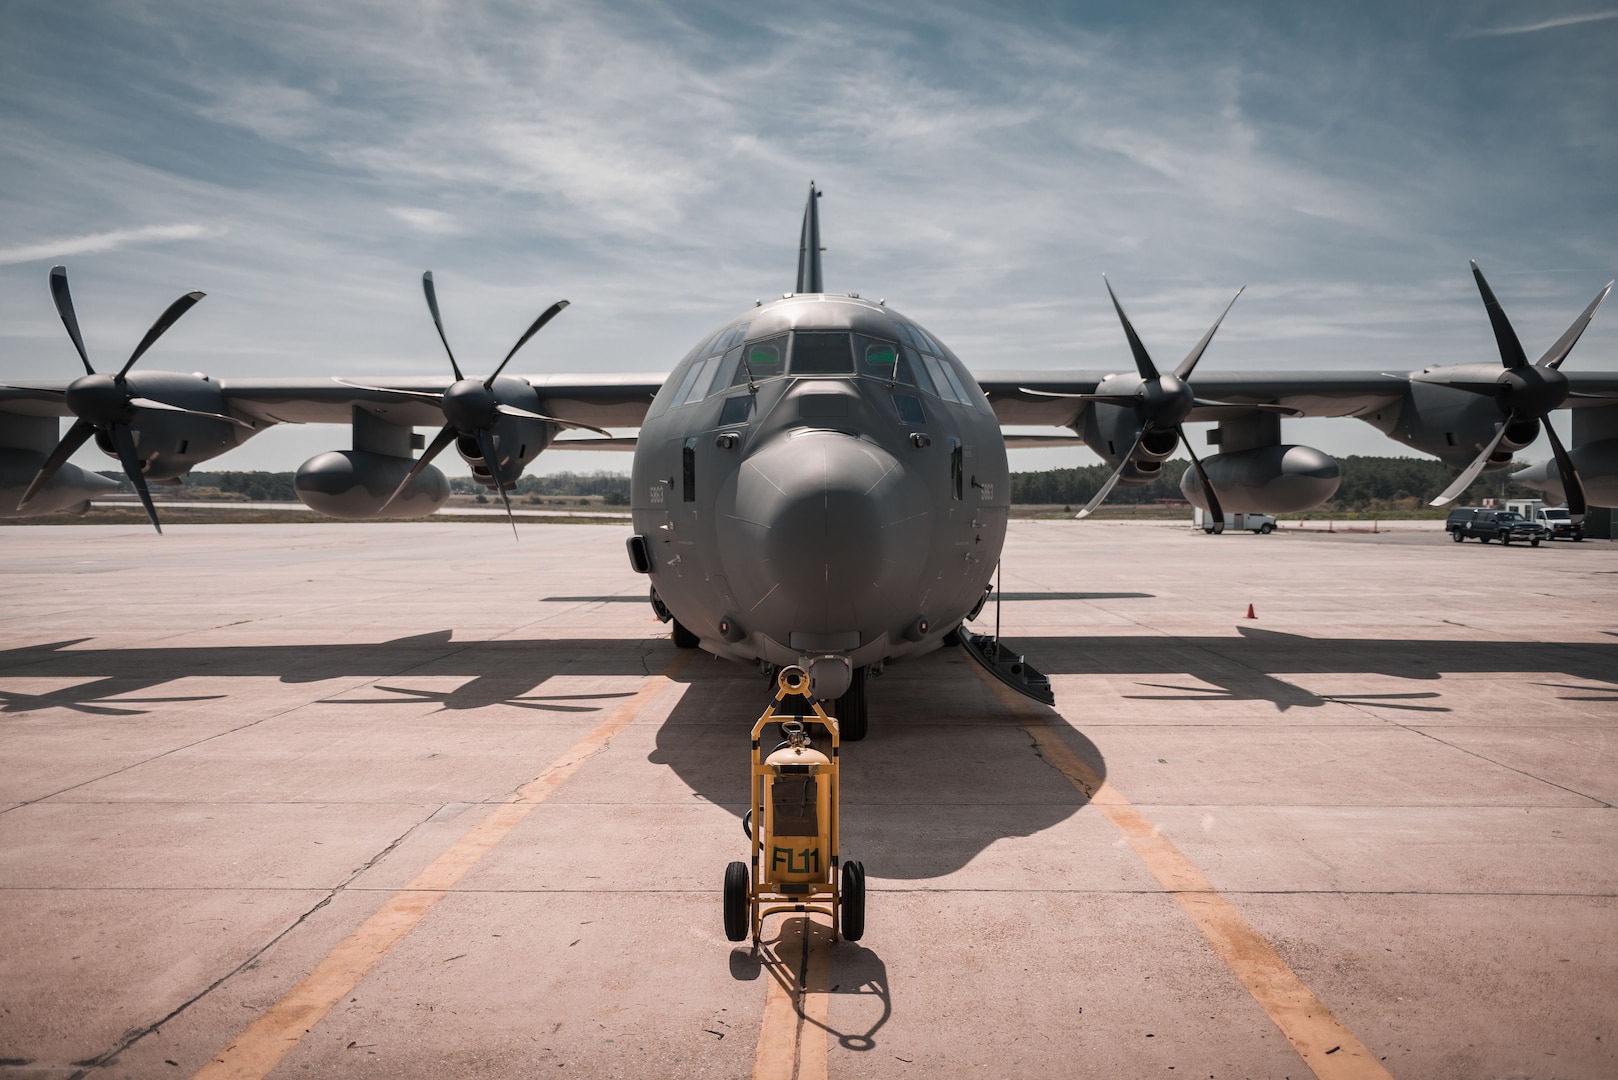 A HC-130J Combat King II sits on display at the 106th Rescue Wing, New York Air National Guard, during a ceremony at Francis S. Gabreski Air National Guard Base, Westhampton Beach, N.Y., May 17, 2019. The 106th presented the rescue aircraft during a ceremony, the first of four brand new such models from Lockheed Martin, the first time in the 106th's 72 year history that is has received aircraft new from the manufacturer and will be flown by the wing's 102nd Rescue Squadron, the oldest unit in the Air National Guard.